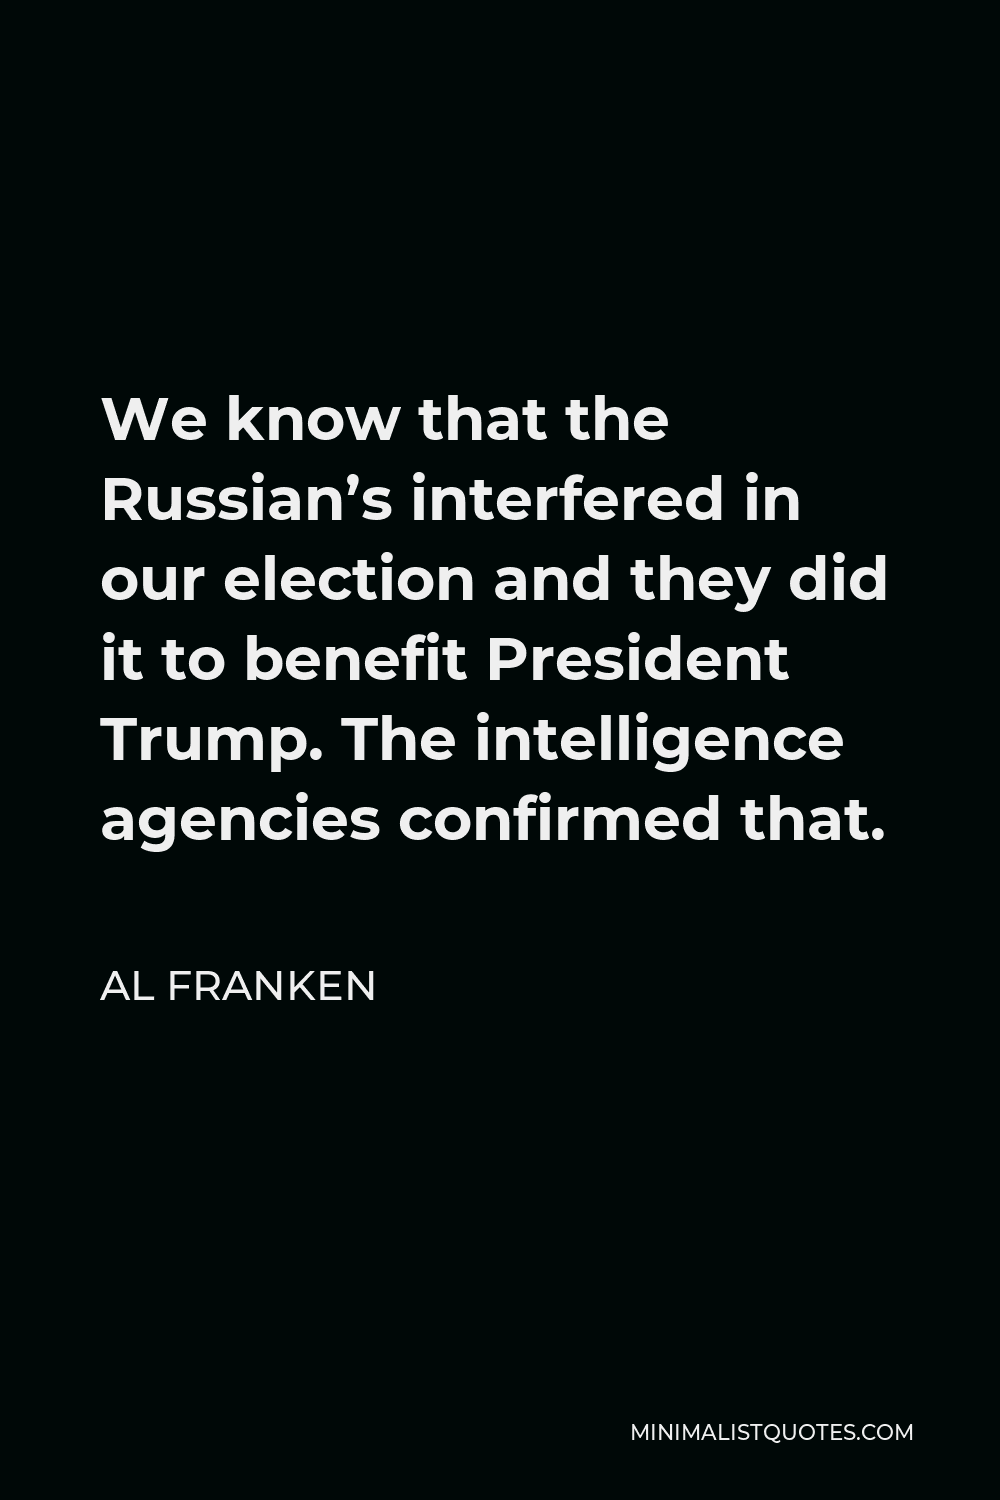 Al Franken Quote - We know that the Russian’s interfered in our election and they did it to benefit President Trump. The intelligence agencies confirmed that.